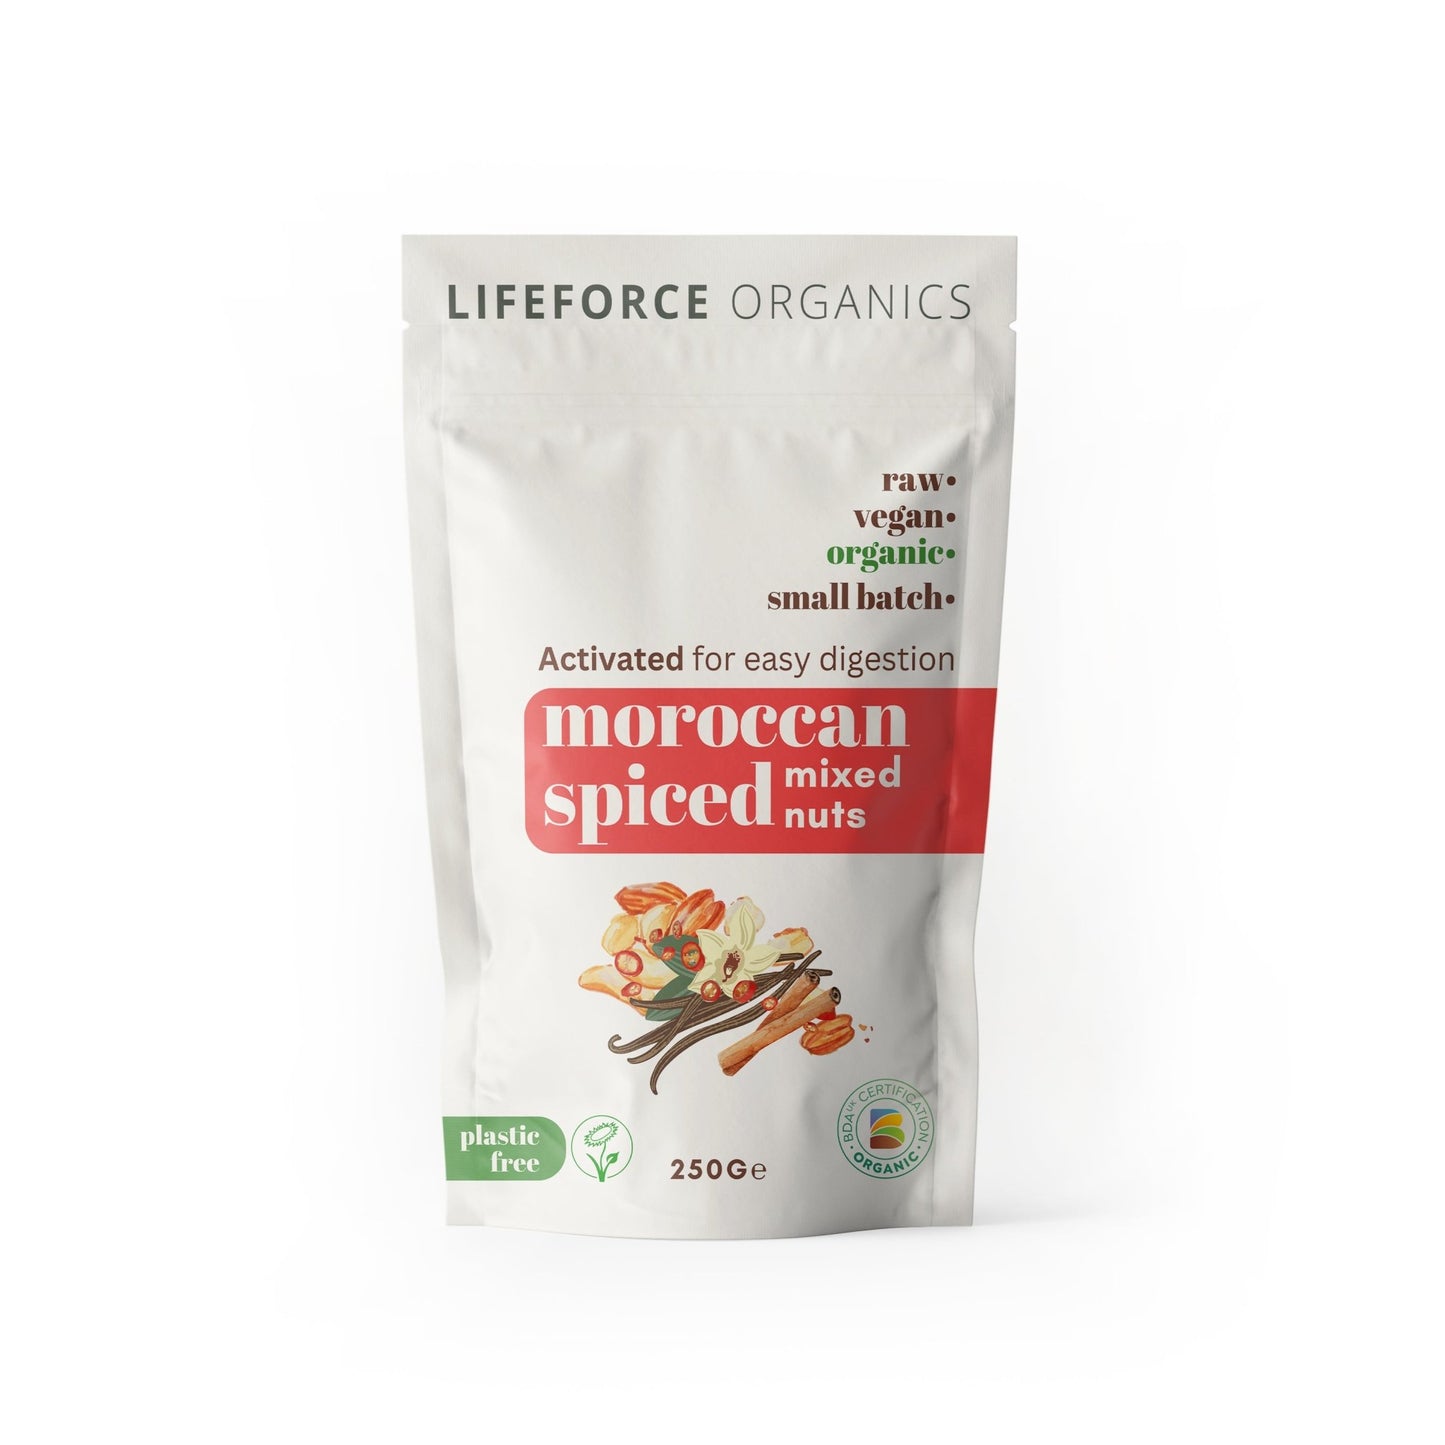 Moroccan Spiced Mixed Nuts - 250g - Lifeforce Organics